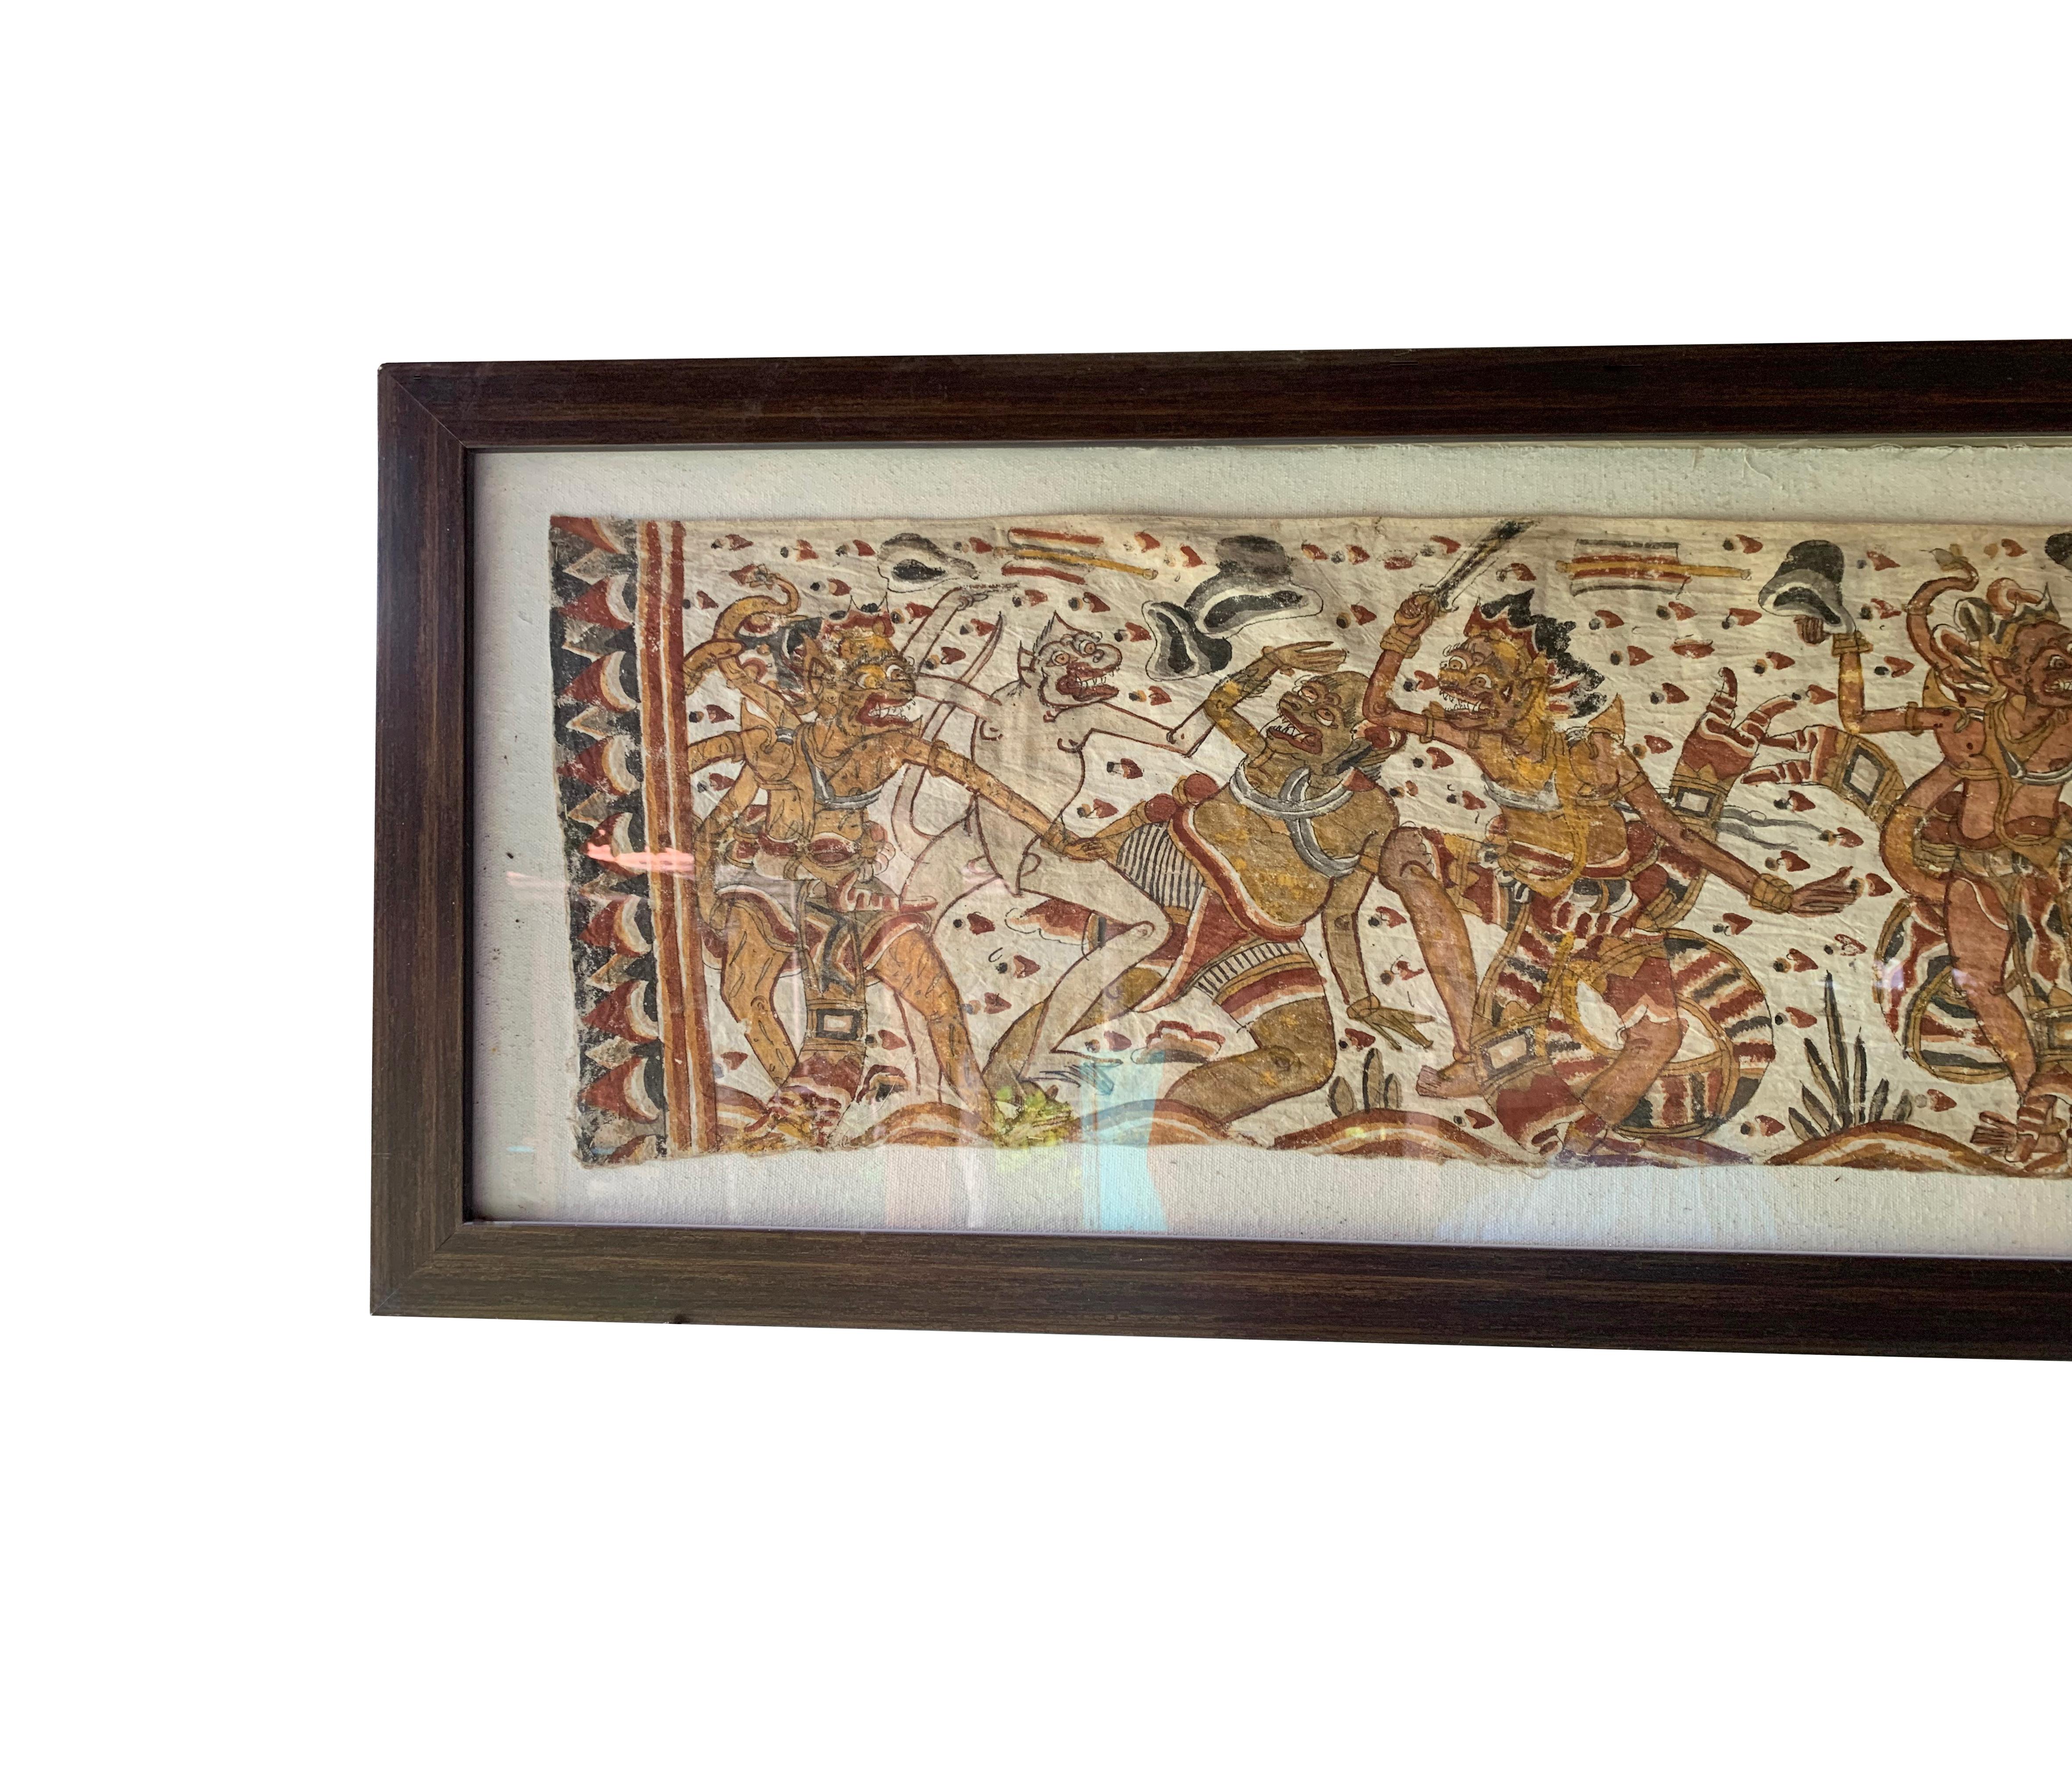 An early 20th century 'Kamasan' cotton textile painting from Bali, Indonesia. The hand-painted image has great detail and depicts Balinese Hindu mythology. It has been framed with a glass front and is ready to be wall mounted with a wall hanging